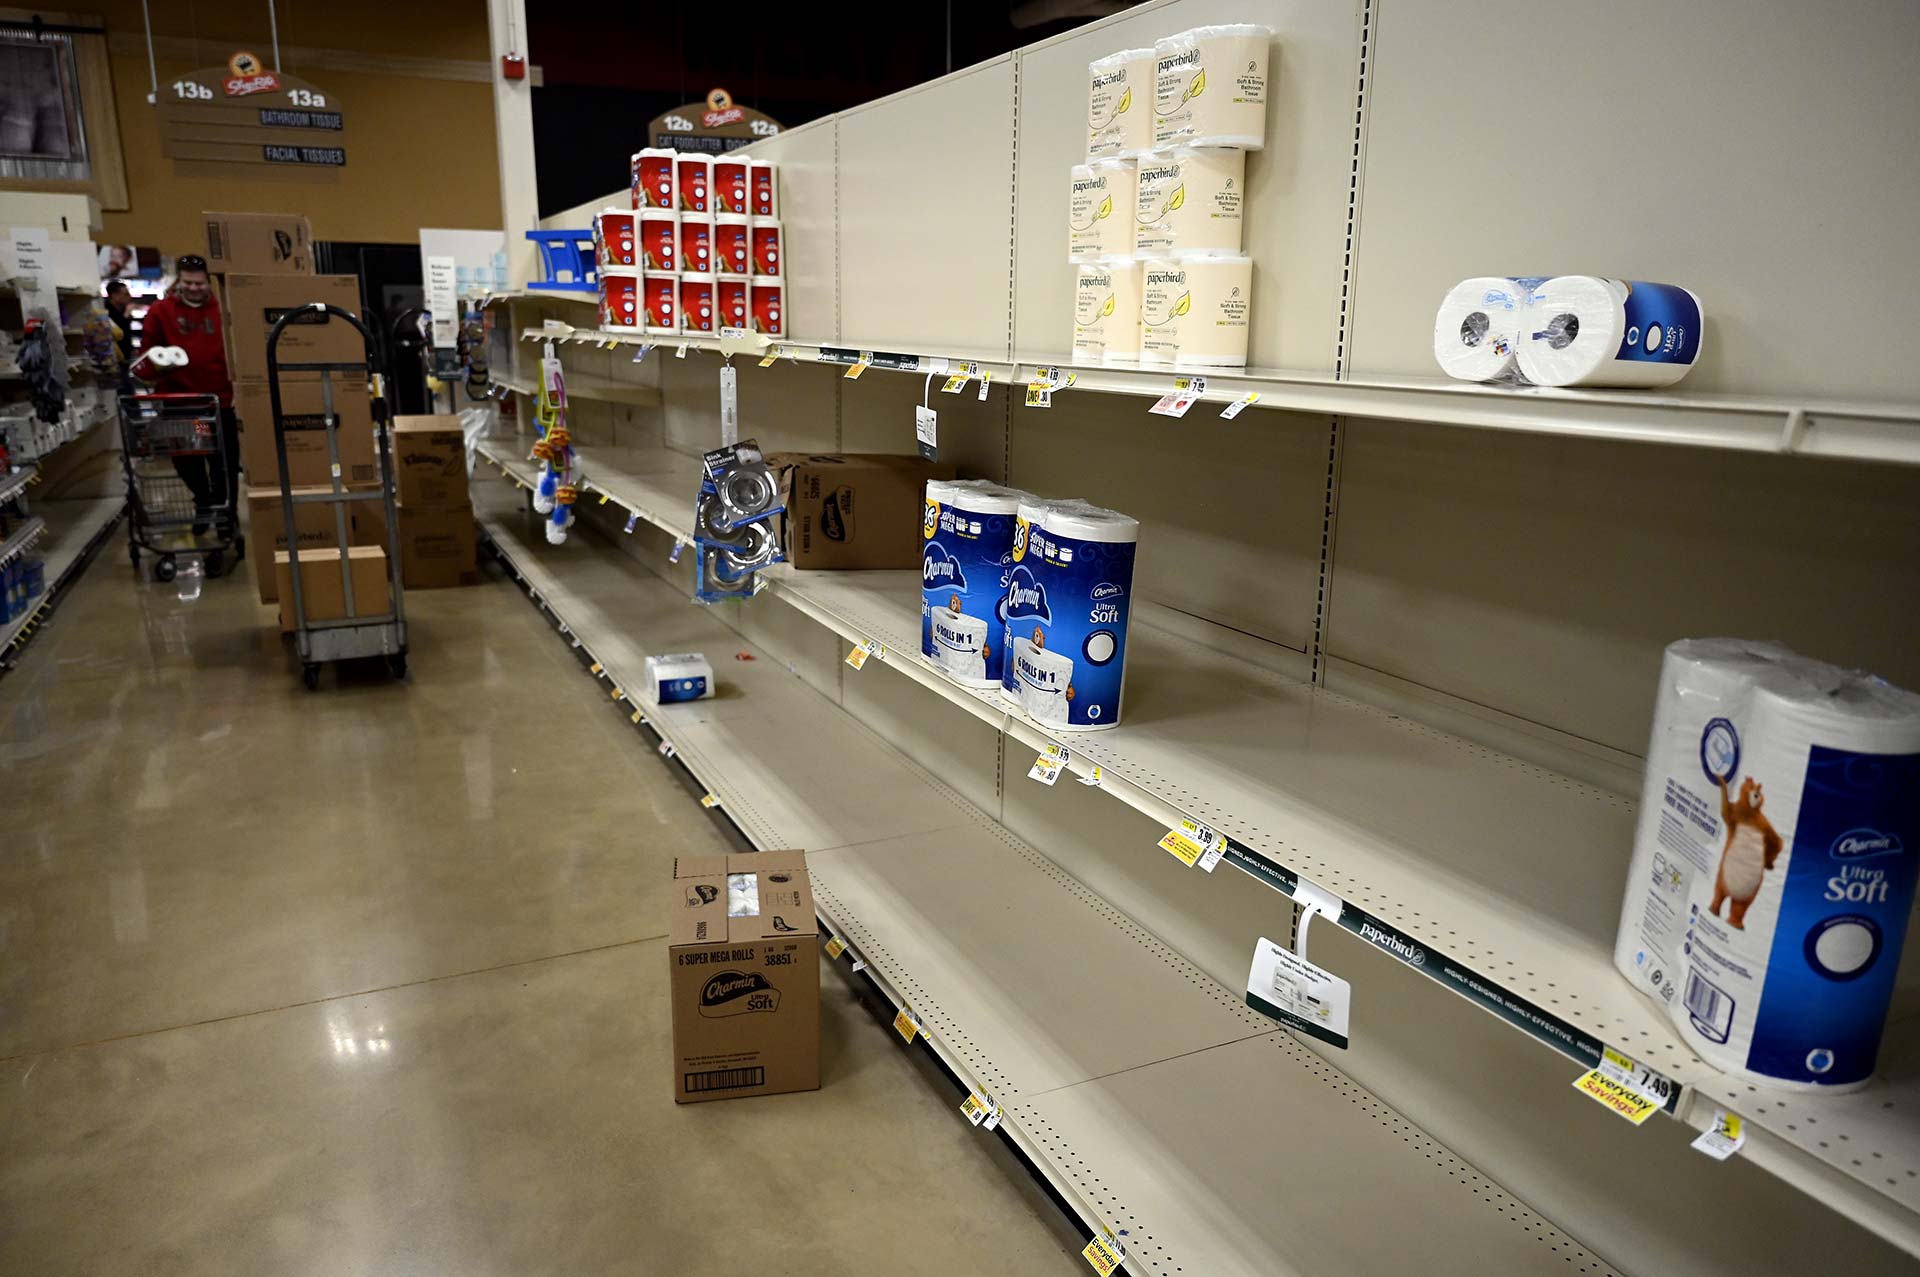 Nearly empty shelves of bathroom tissue is seen at ShopRite in Canton on March 13, 2020. Many Connecticut stores have seen shoppers stock up on supplies and food amid the coronavirus health crisis. (Joe Amon/Connecticut Public/NENC)